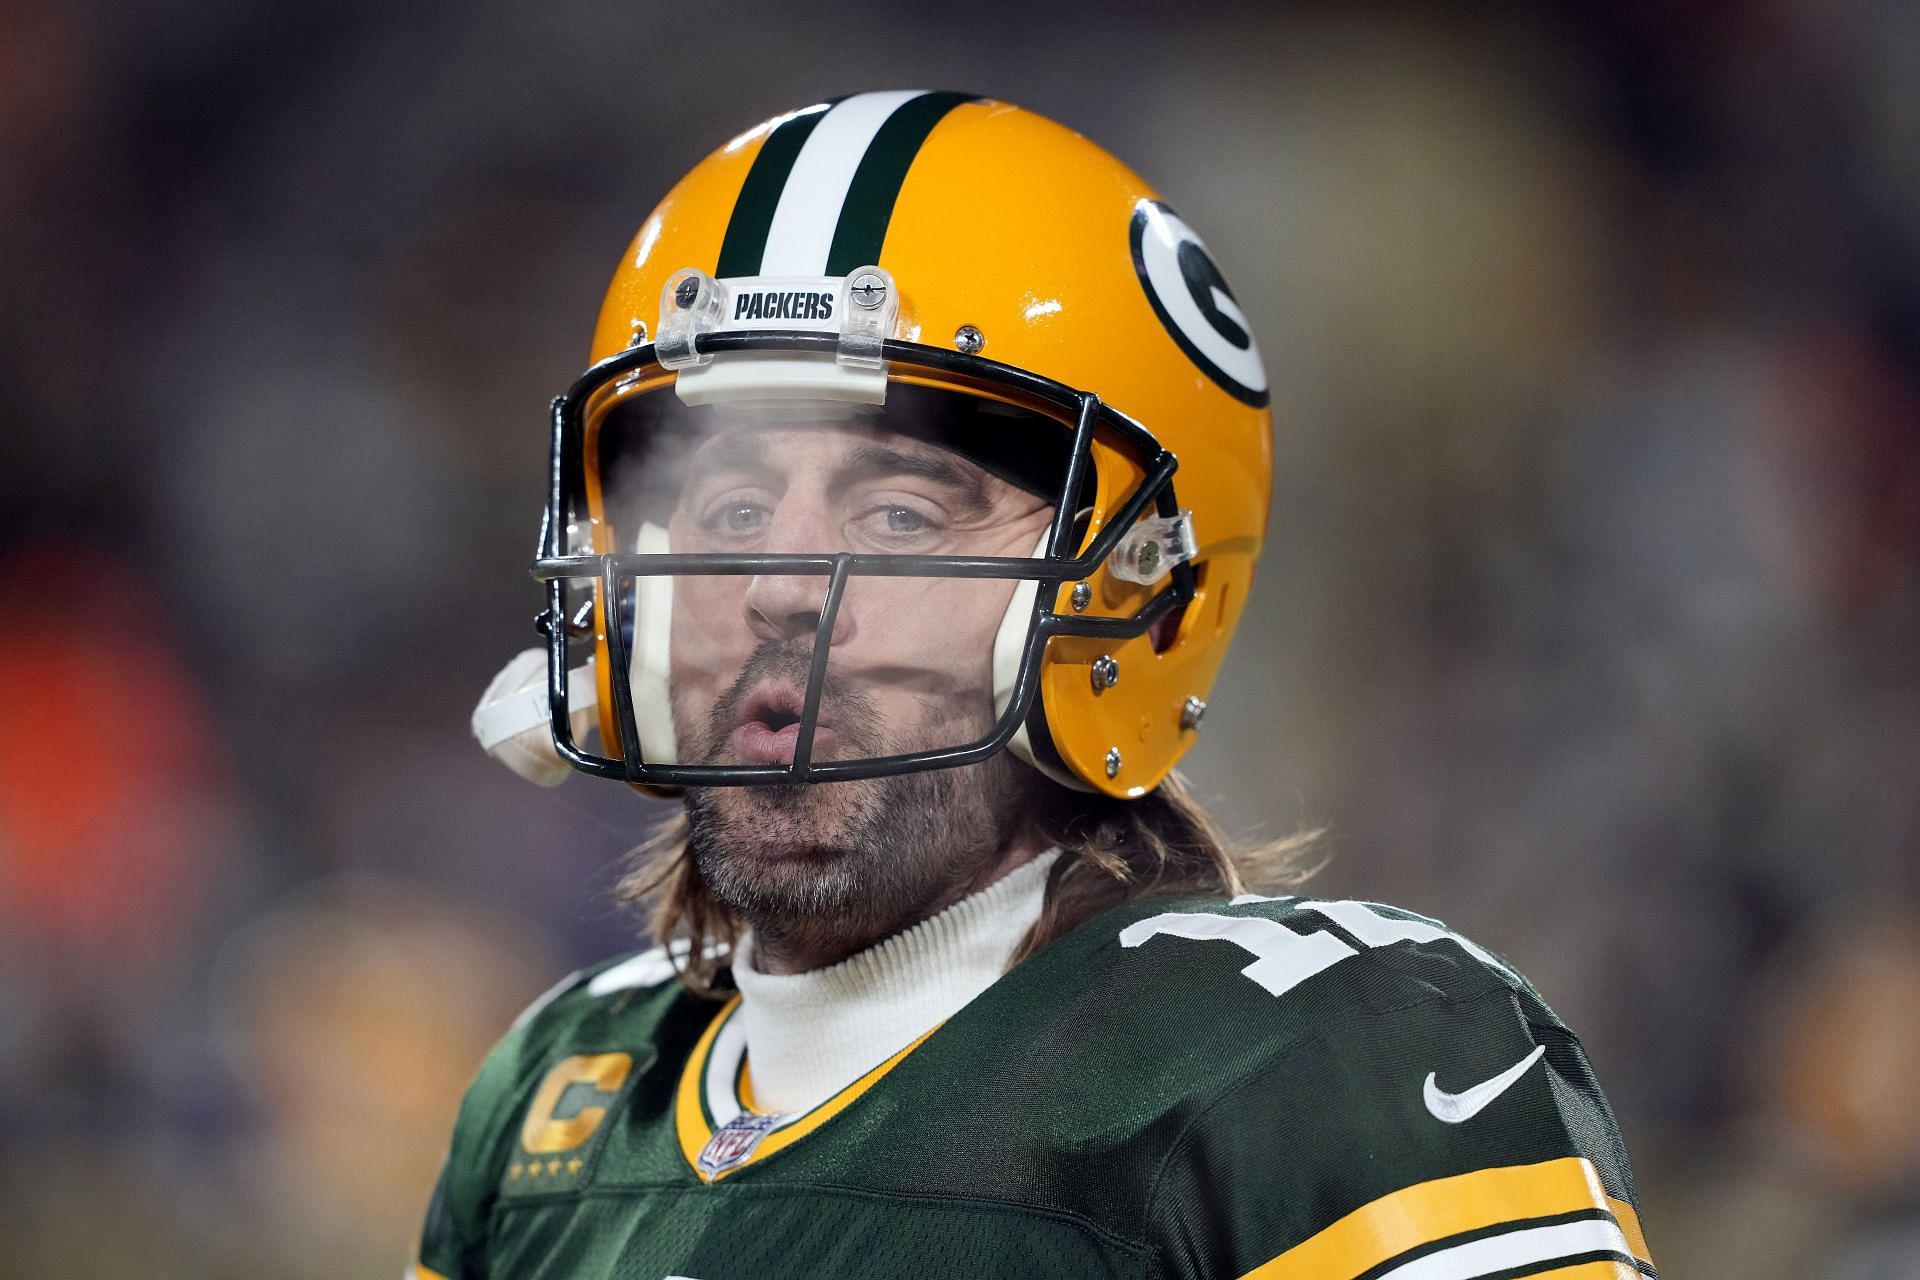 Colin Cowherd thinks Aaron Rodgers deliberately bankrupted the Packers this offseason